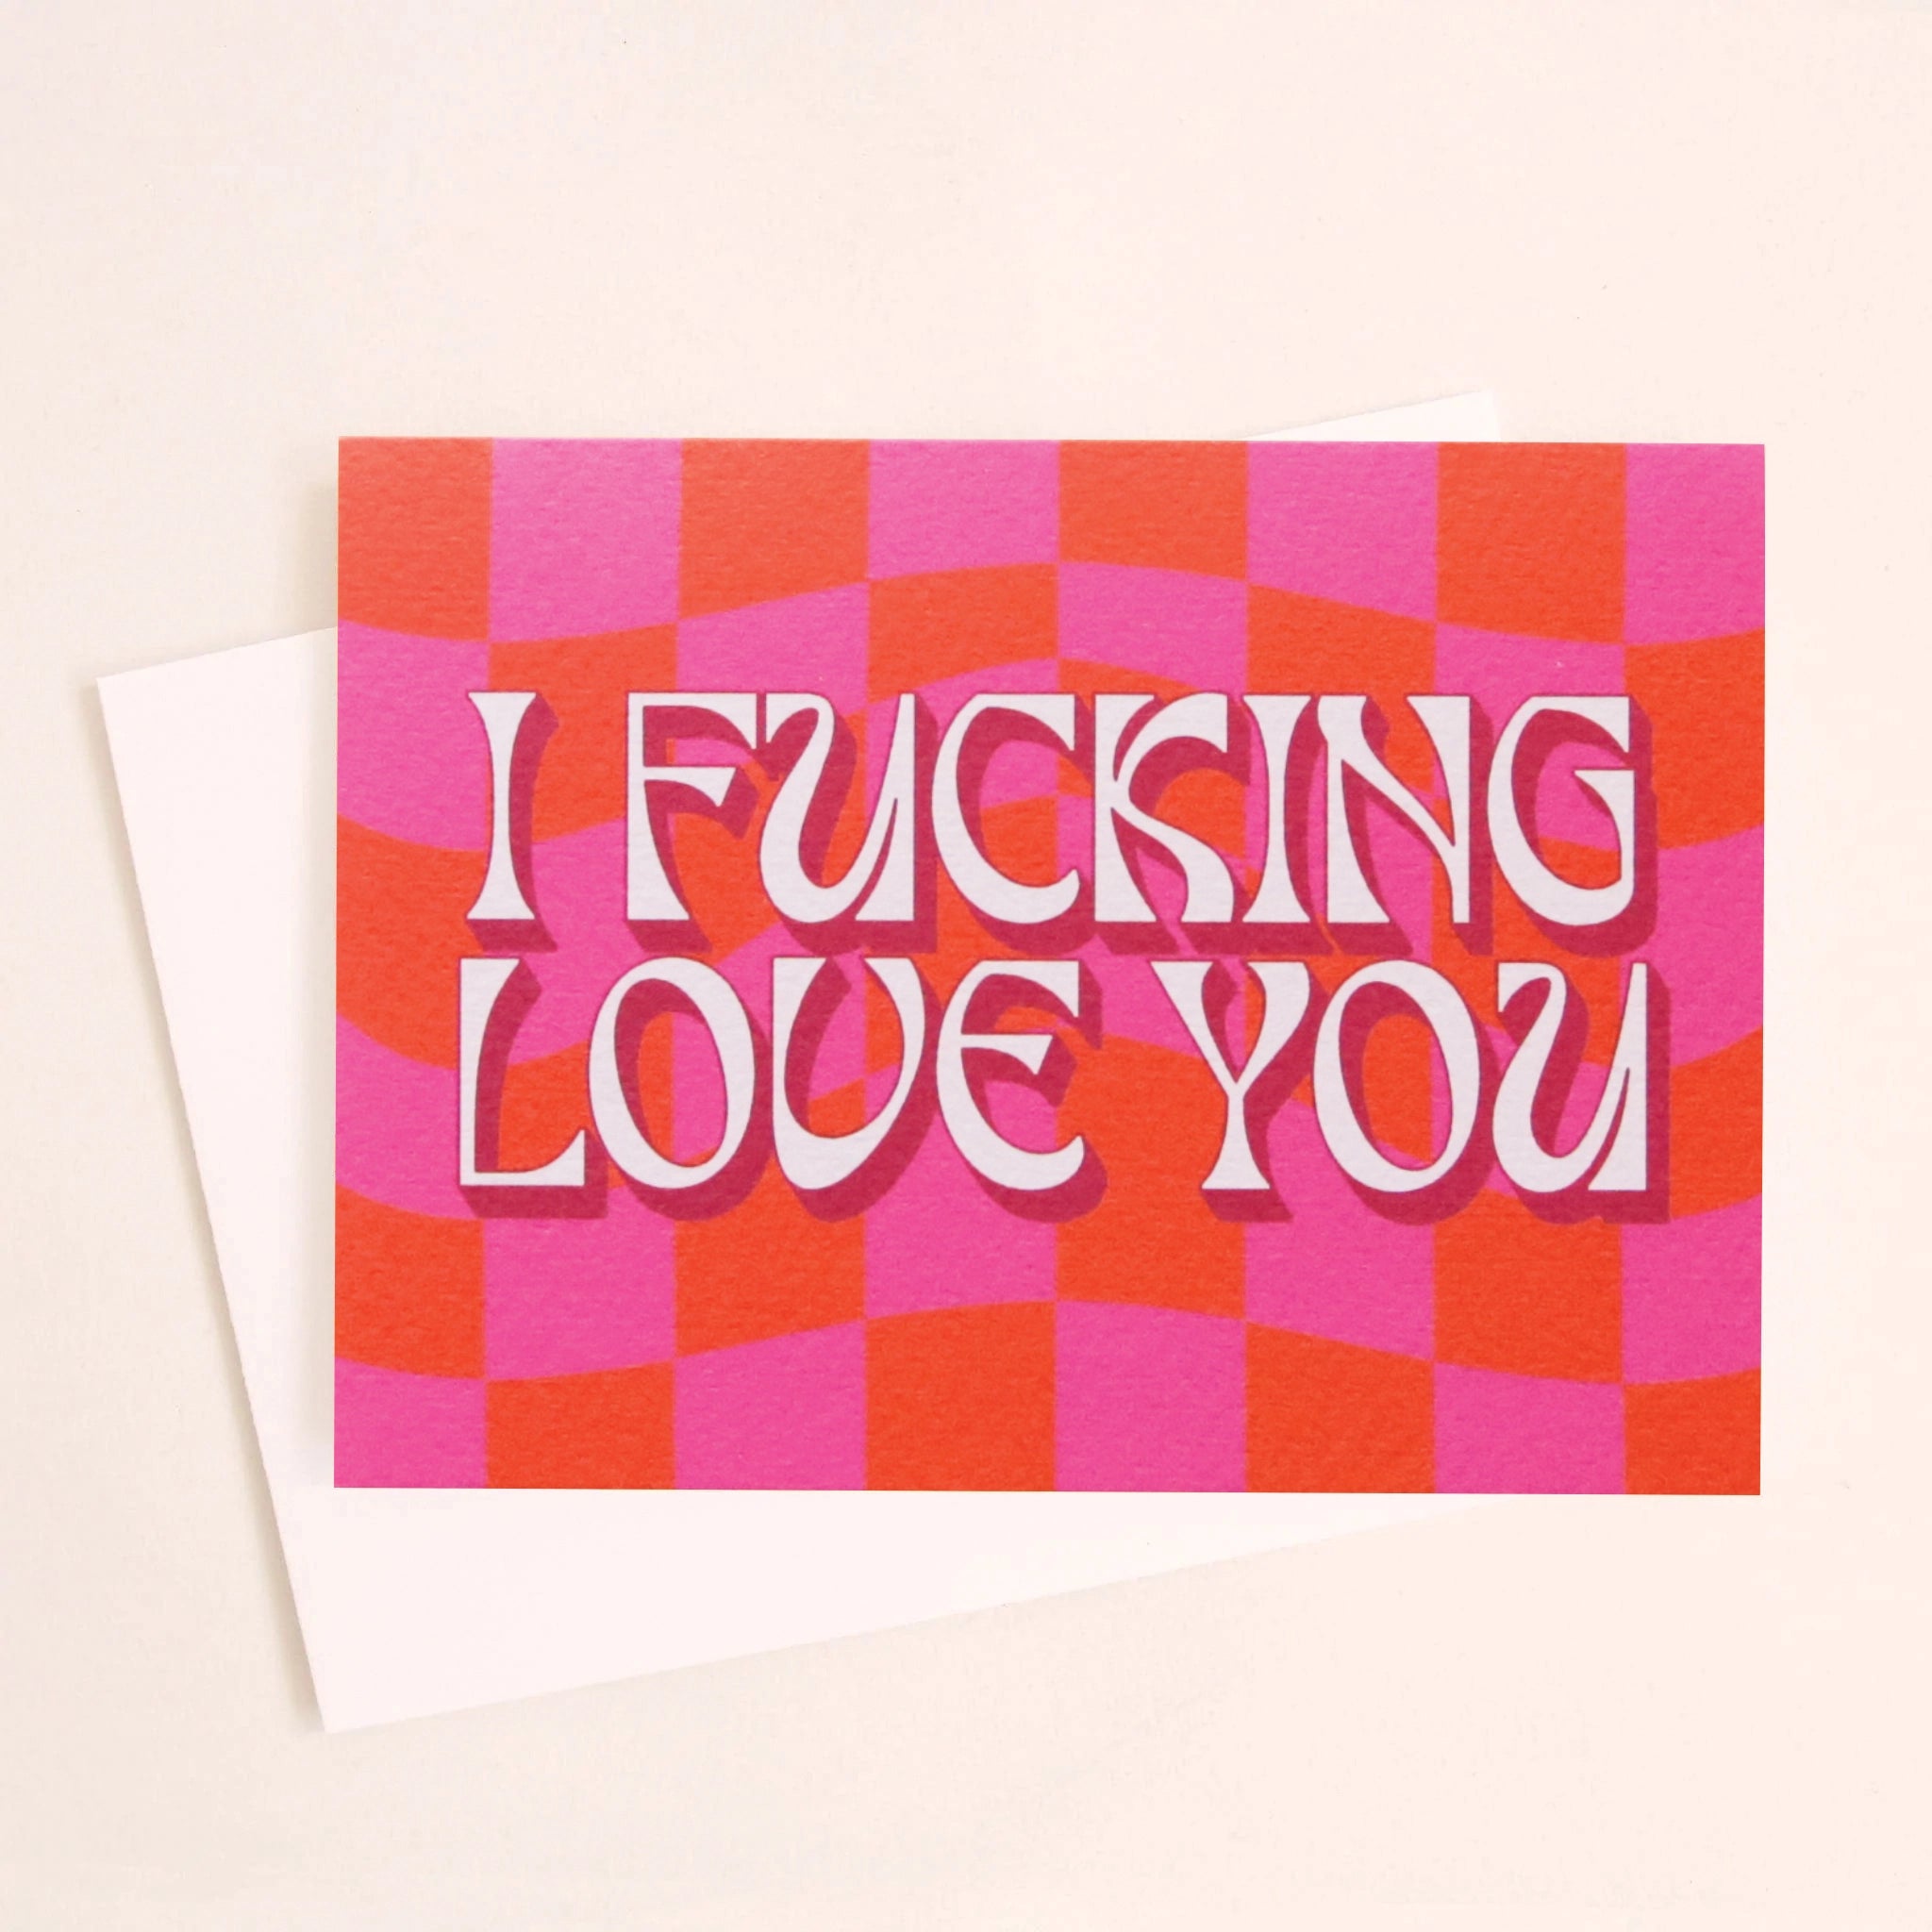 On a white background is a hot pink and red greeting card what reads, "I Fucking Love You" in light pink letters, and photographed with the coordinating white envelope. 